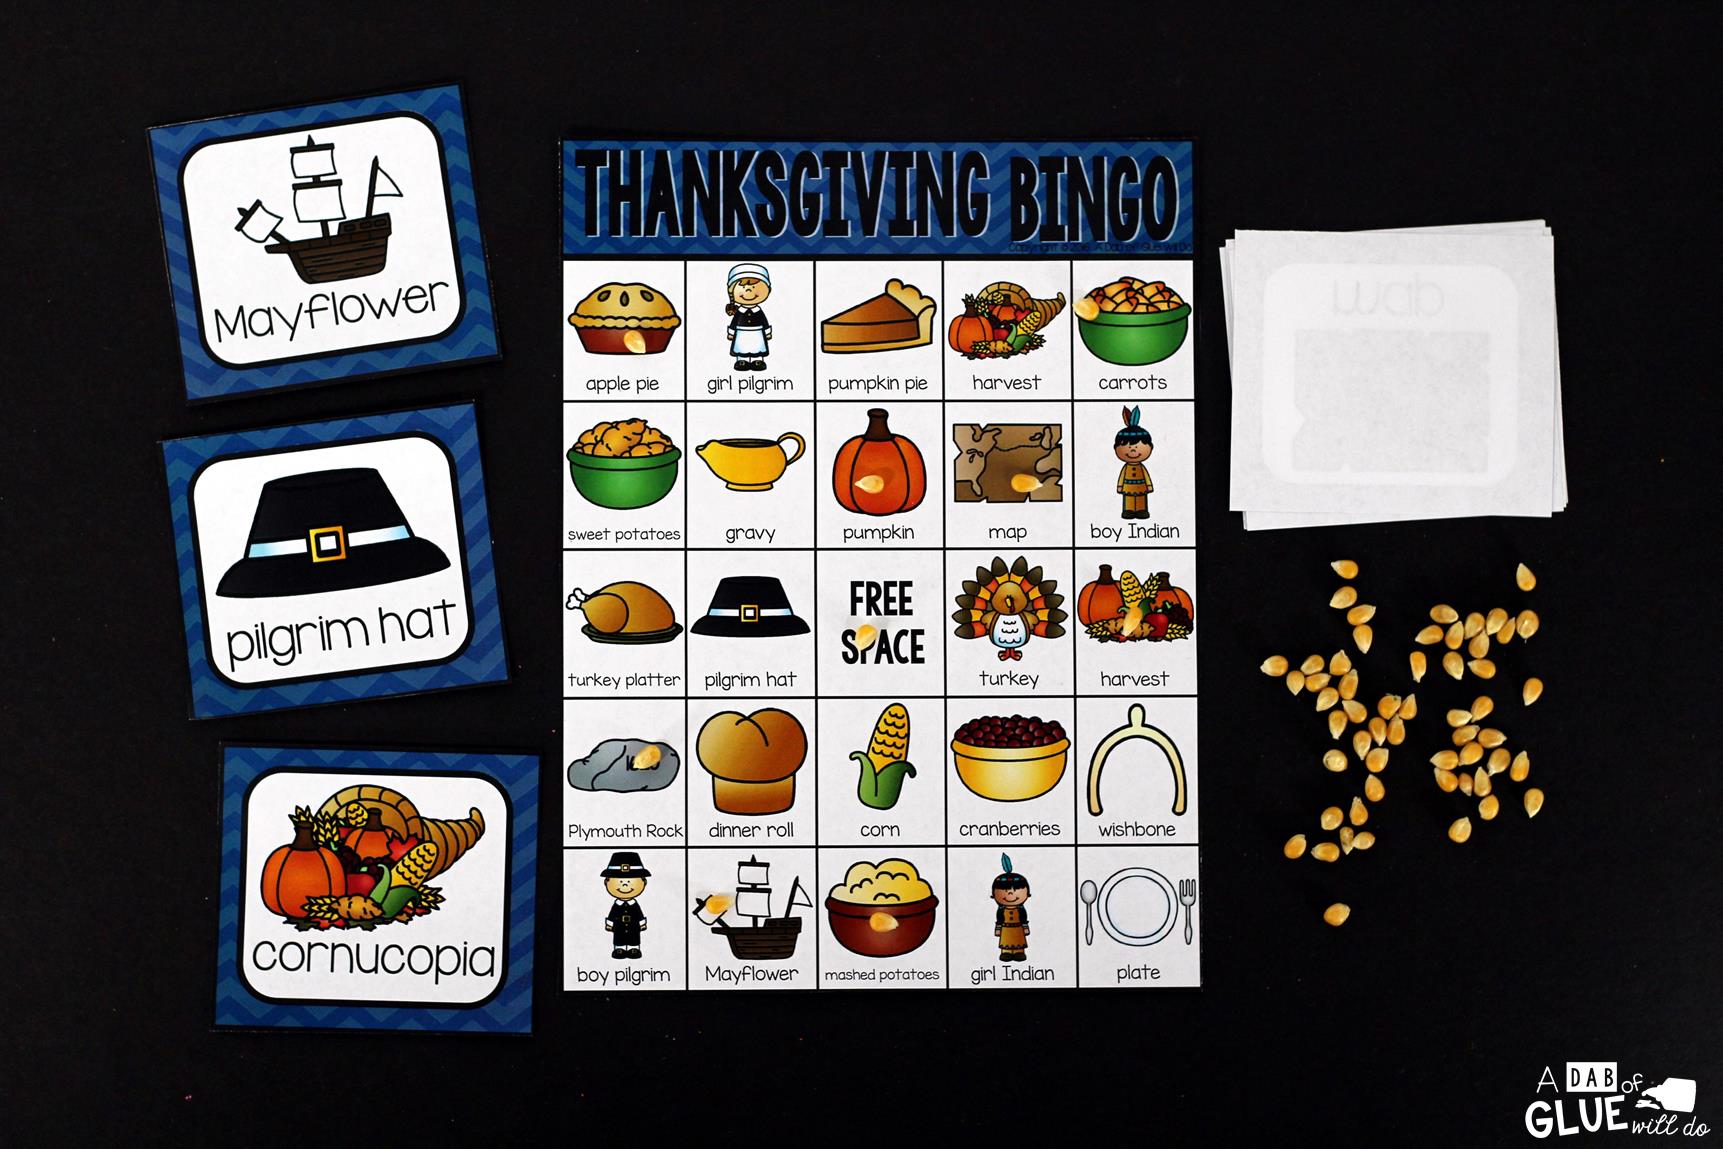 Play Bingo with your elementary age students for a fun Thanksgiving themed game! Perfect for large groups in your classroom or small review groups. Add this to your Thanksgiving lesson plans with 30 unique Halloween Bingo boards with your students! This is a great way to introduce or review everything about Thanksgiving. Students will not even know that they are learning. Teaching cards are also included in this fun game for young children! Black and white options available to save your color ink.